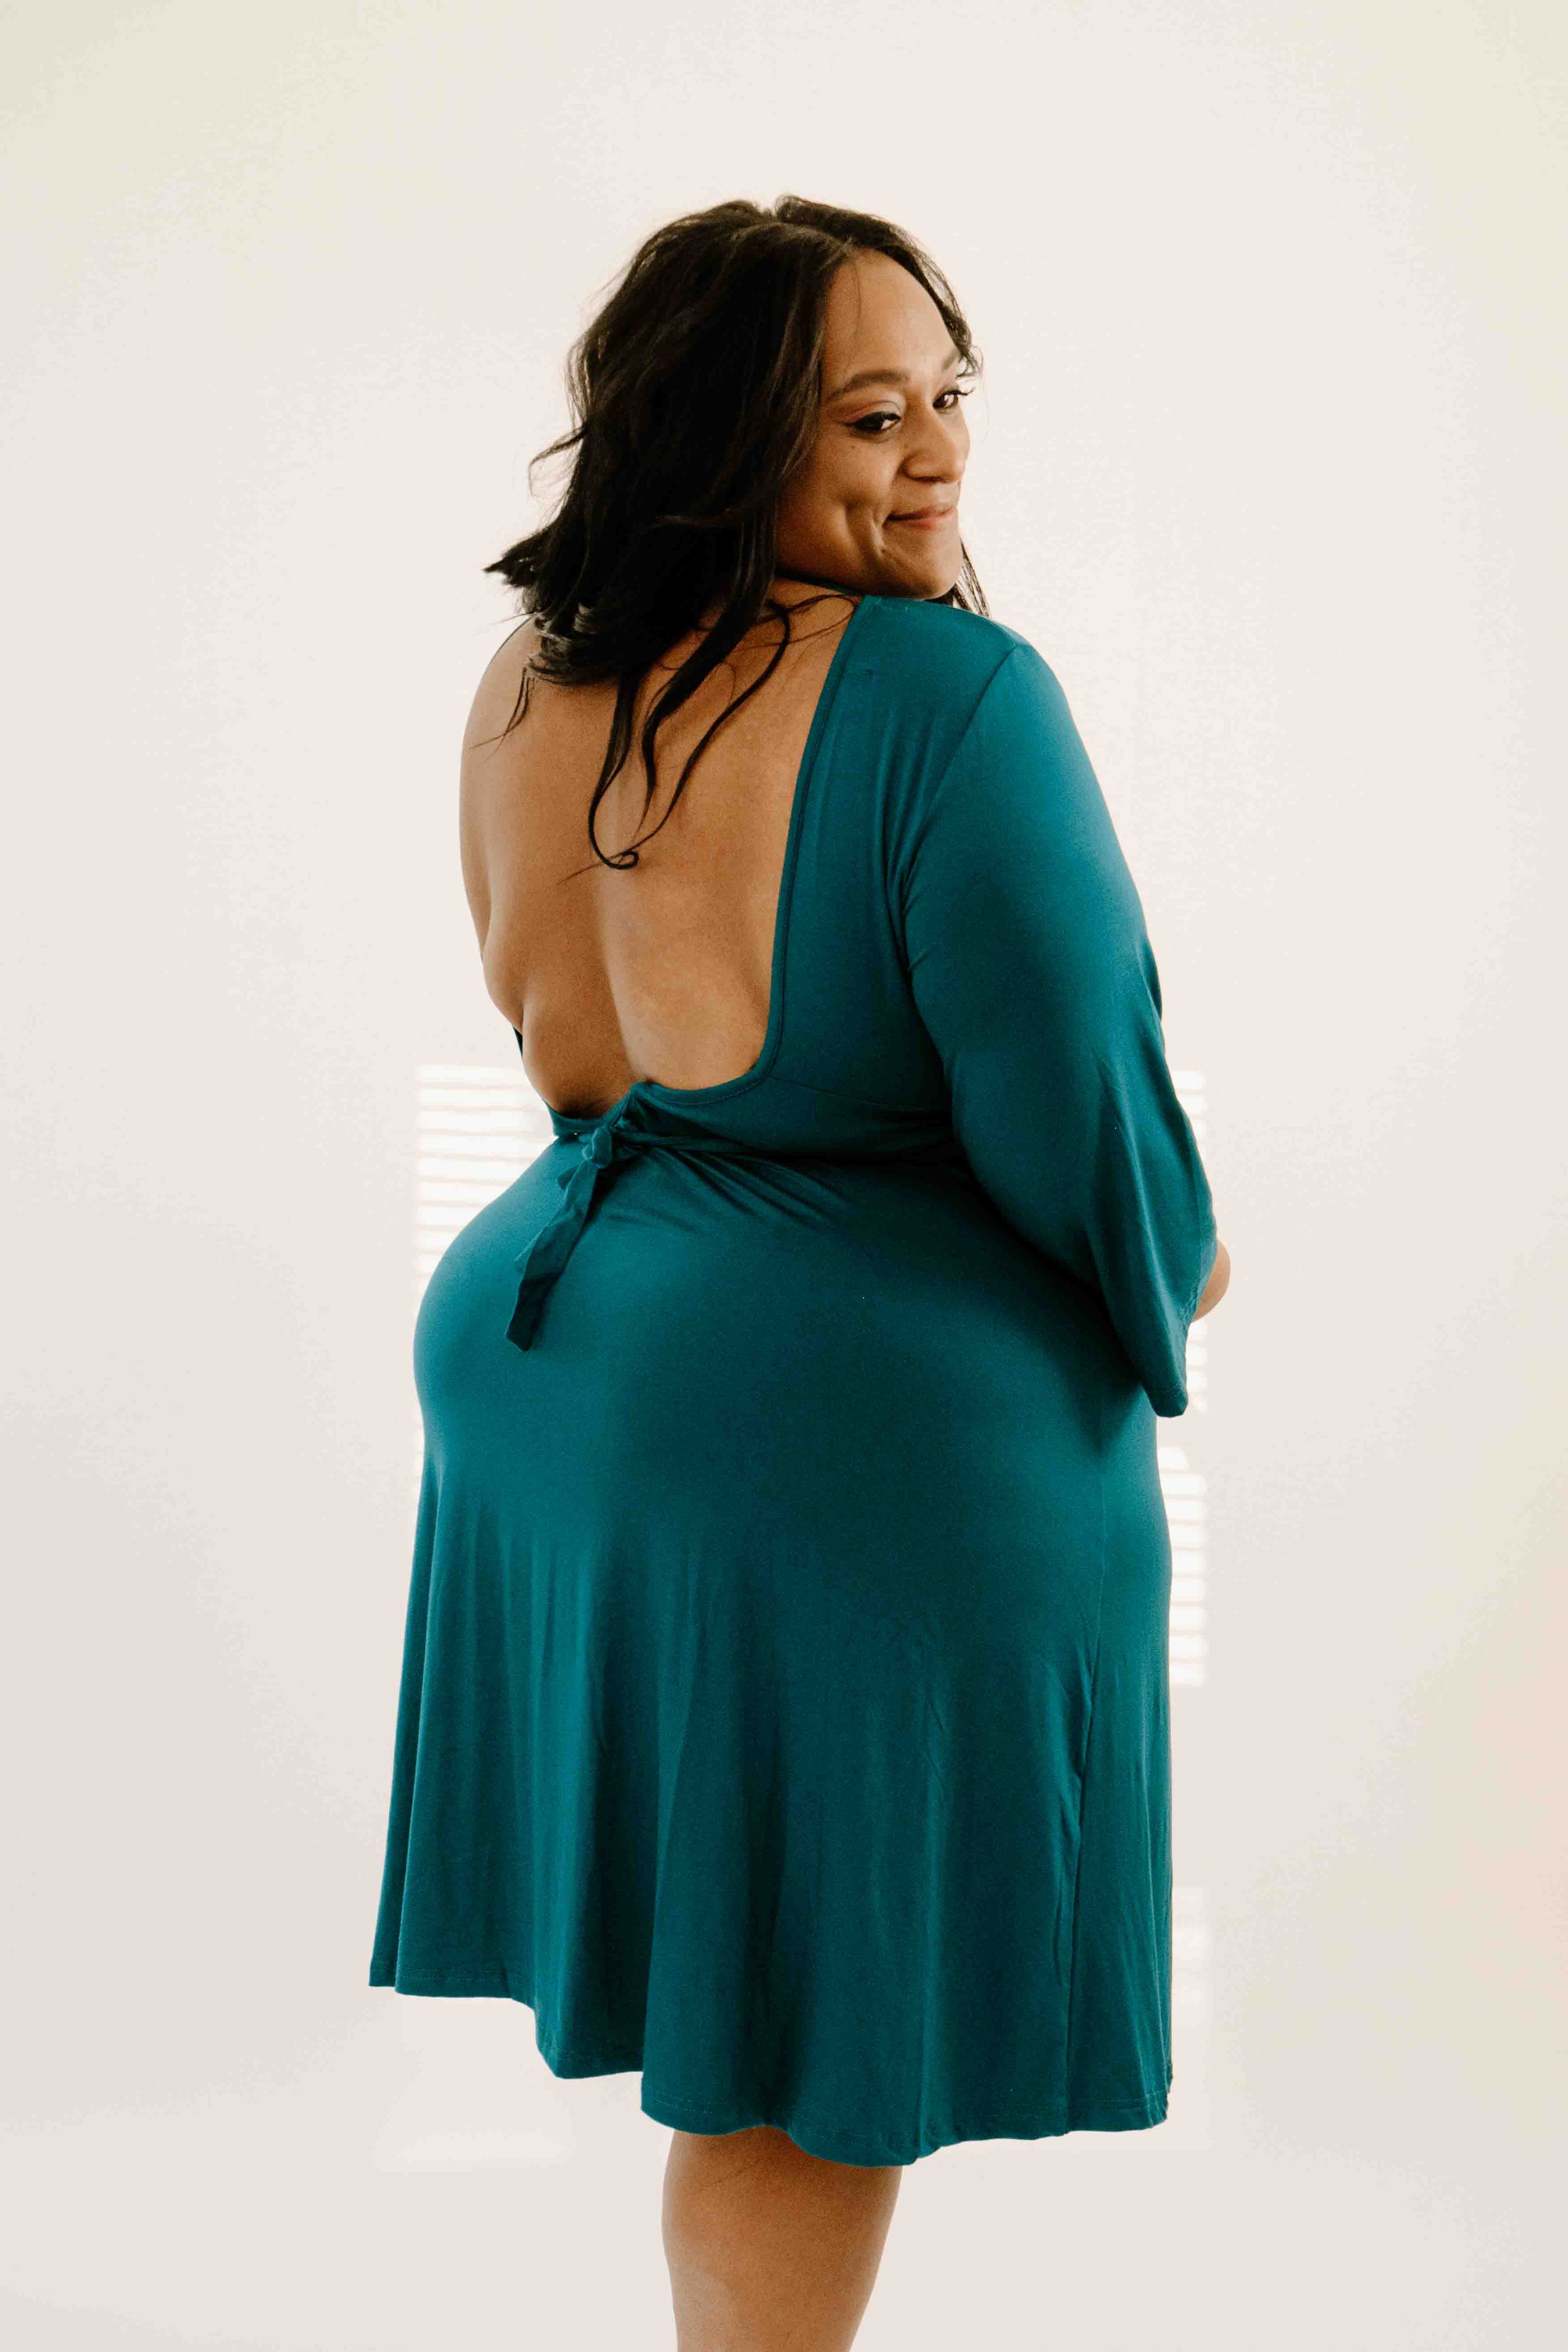 Lila Gown in Deep Teal, for Labor & Postpartum -  UK